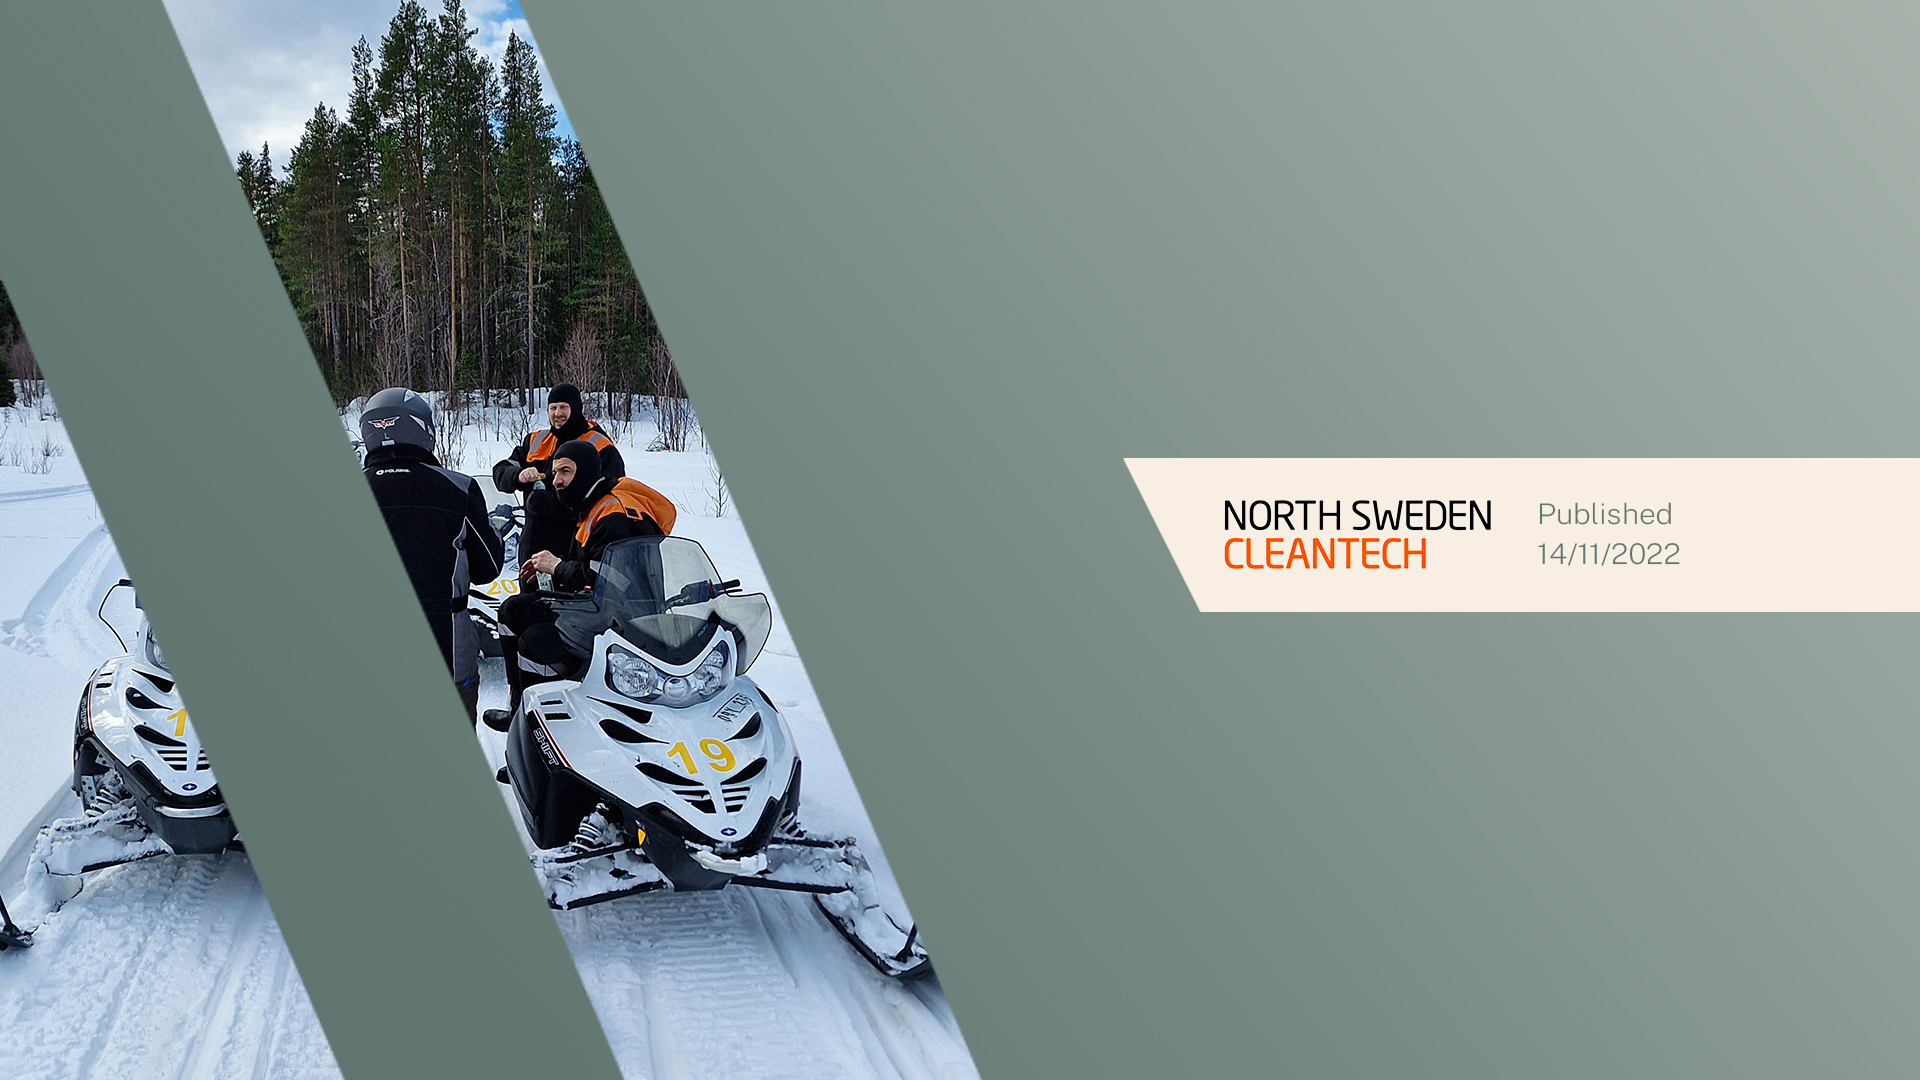 Company of the month, North Sweden Cleantech